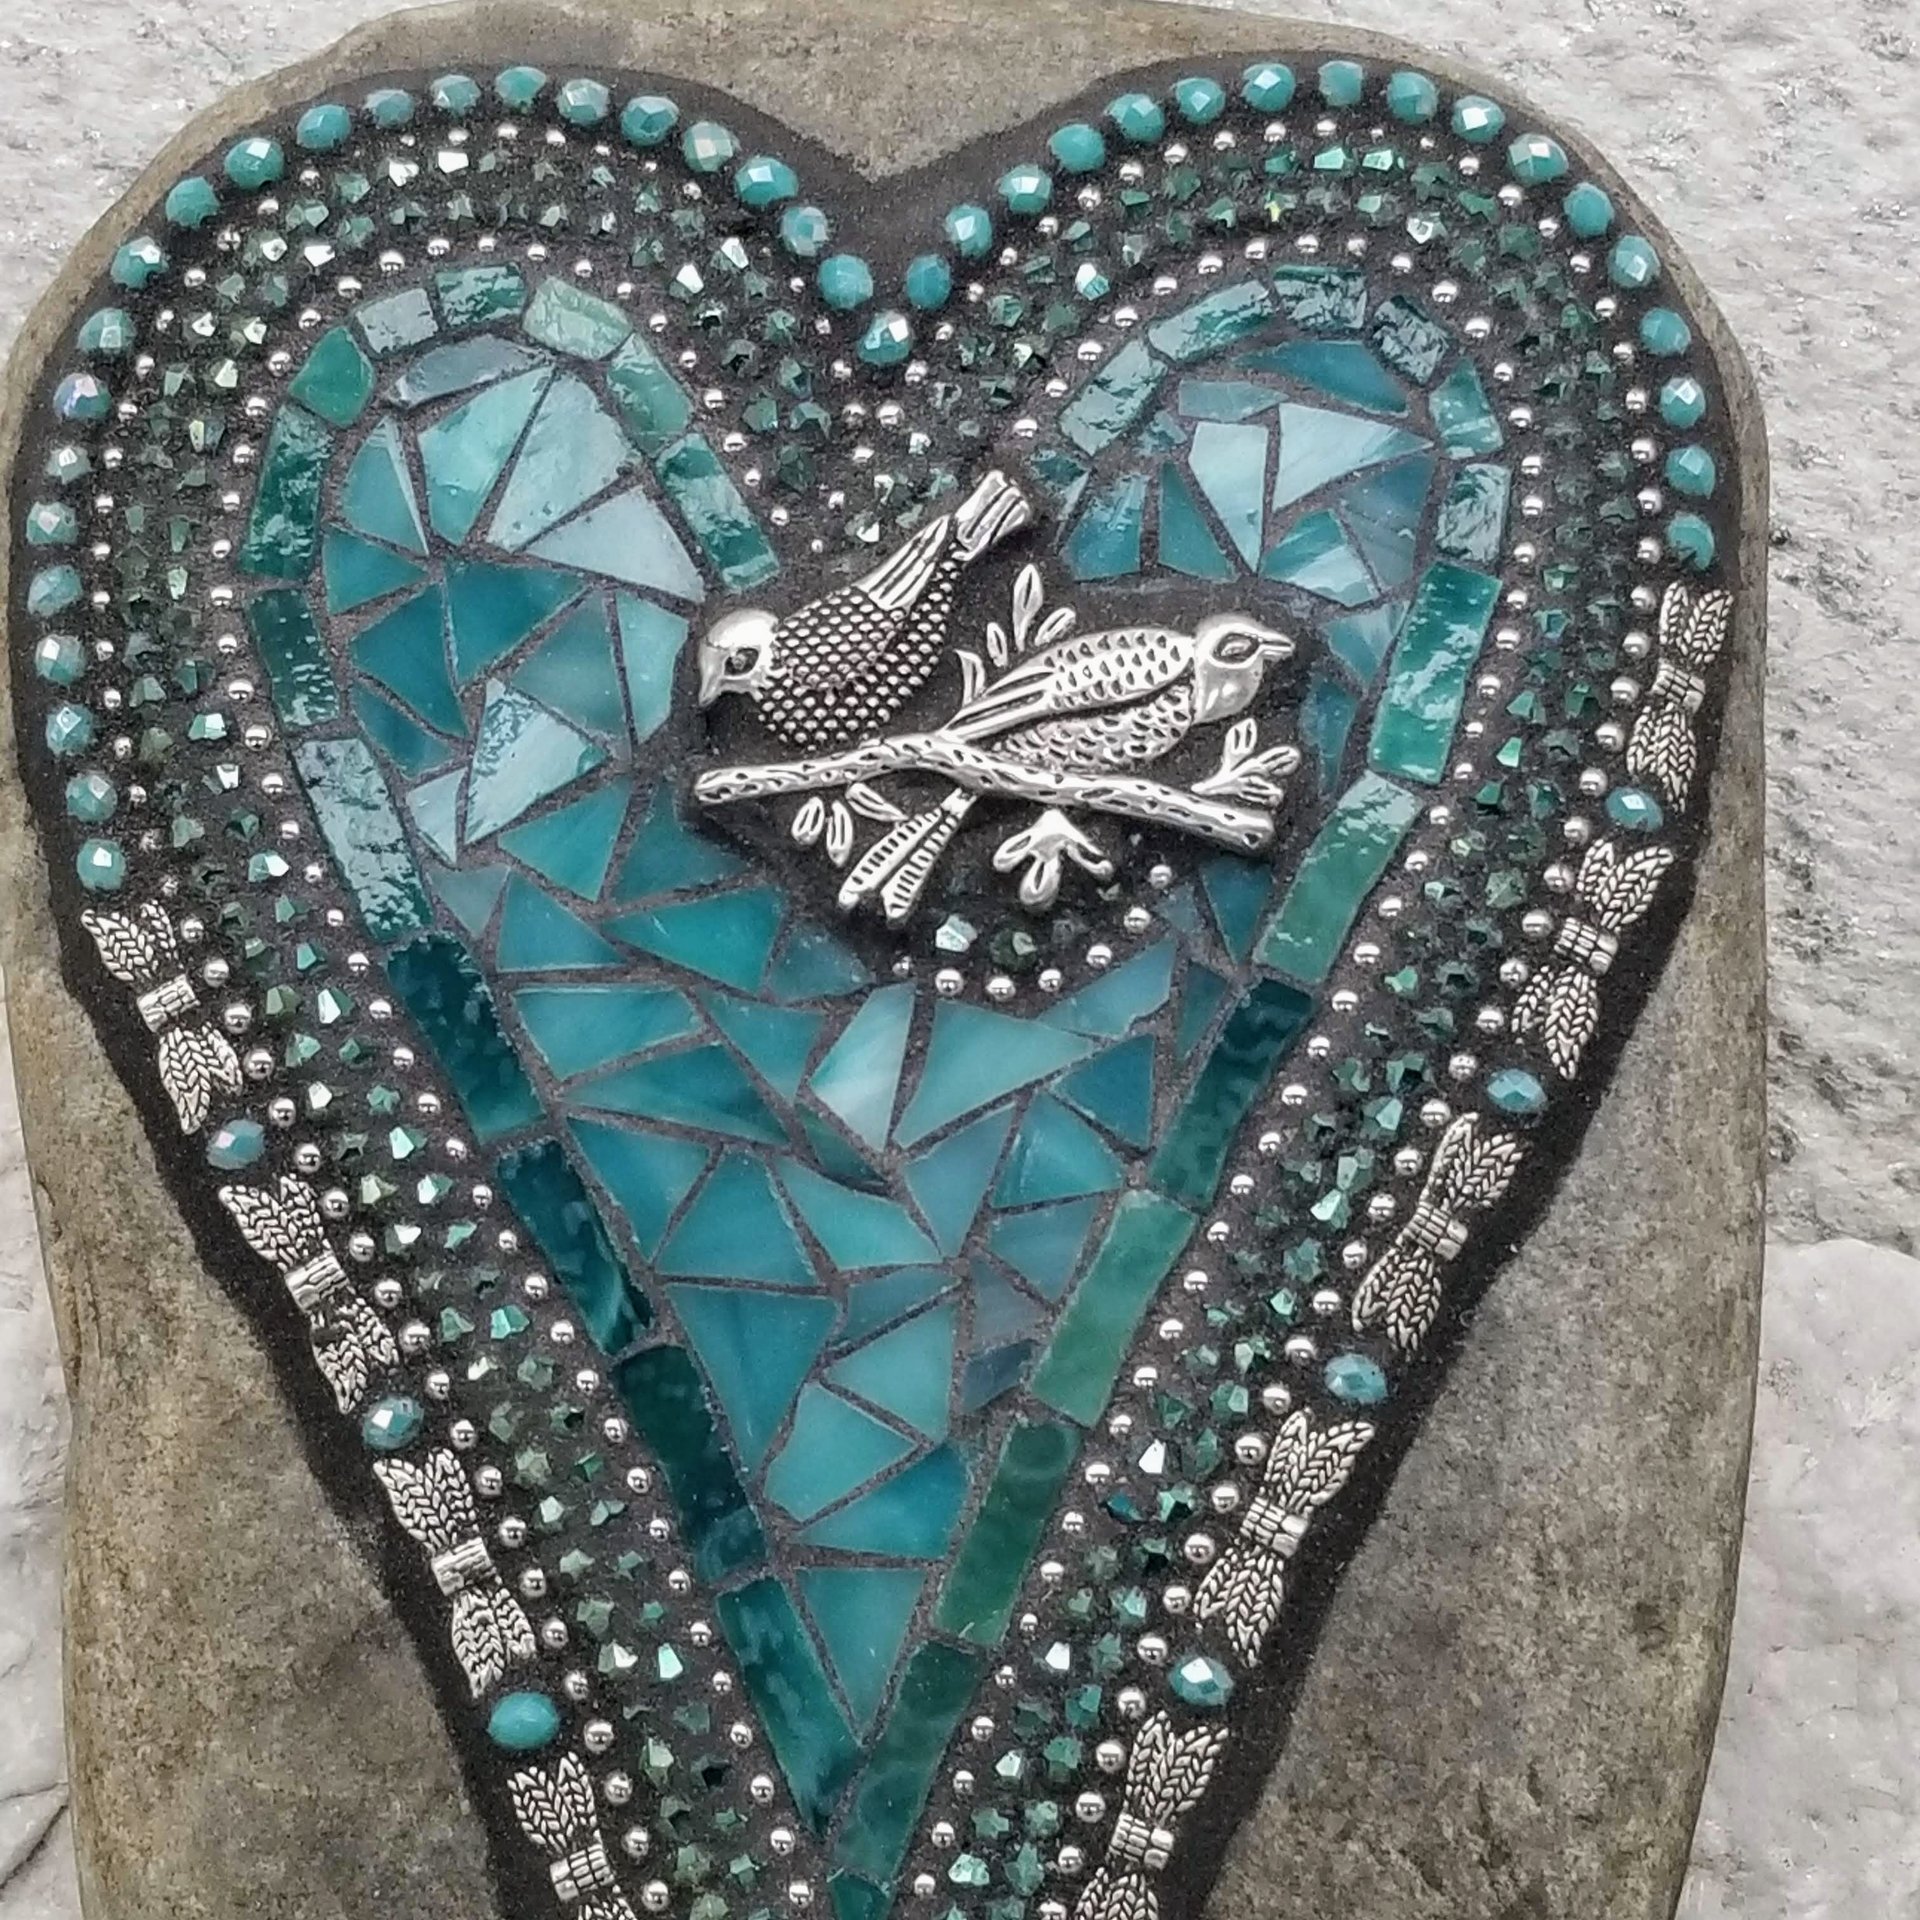 Teal Blue Heart with Birds and Dragonfly Wings, Garden Stone, Mosaic, Garden Decor